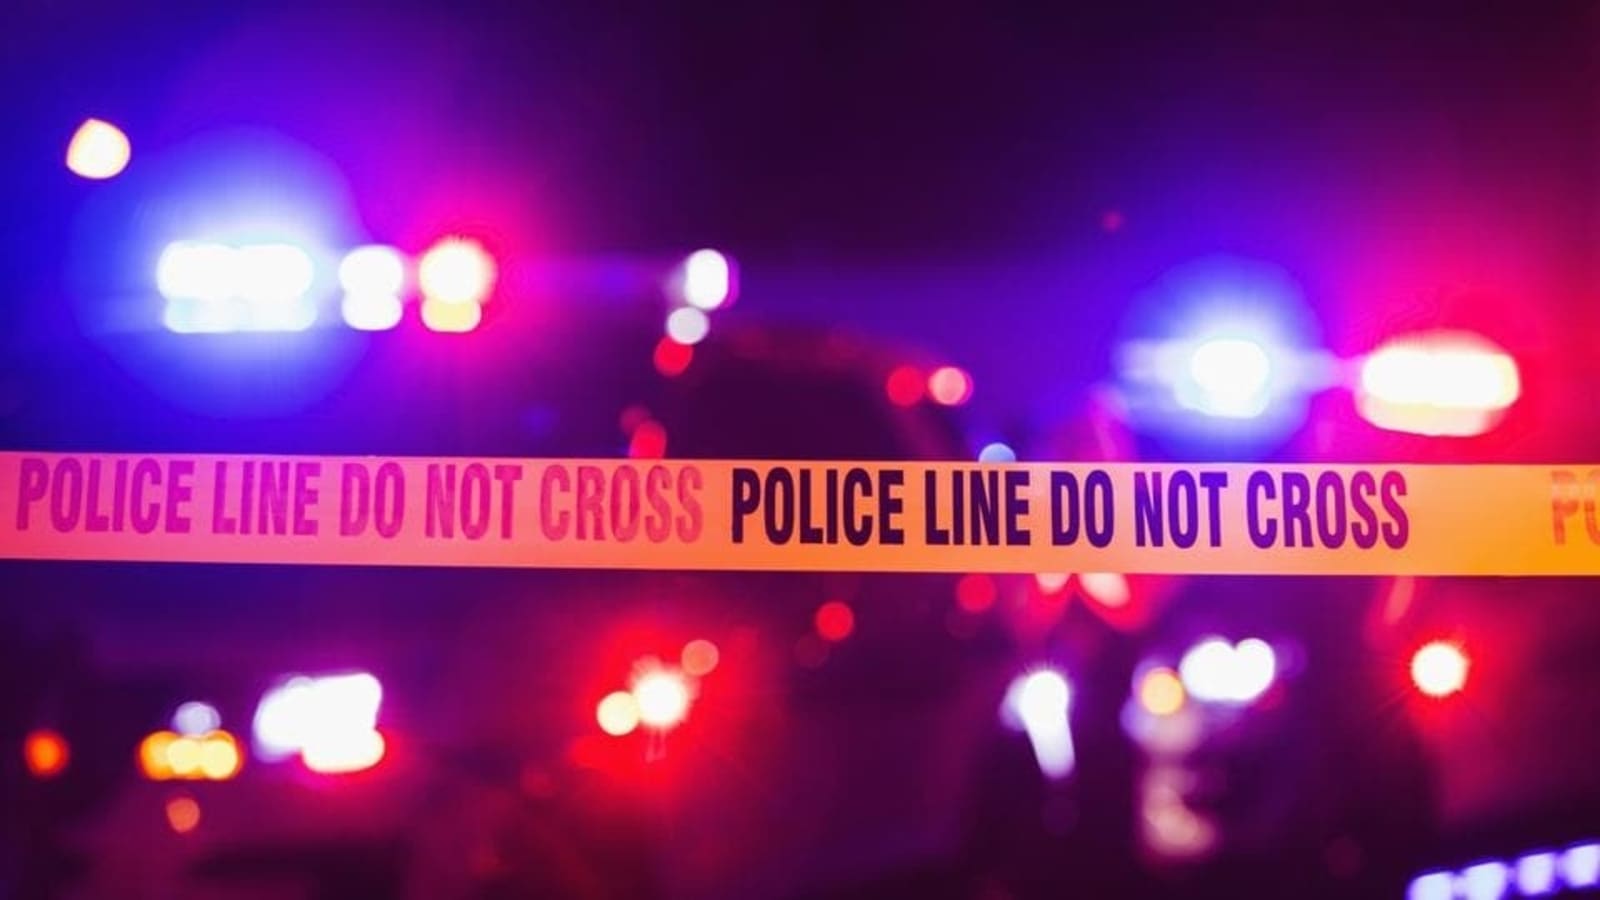 Shooting in Los Angeles area of California, multiple casualties feared: Report